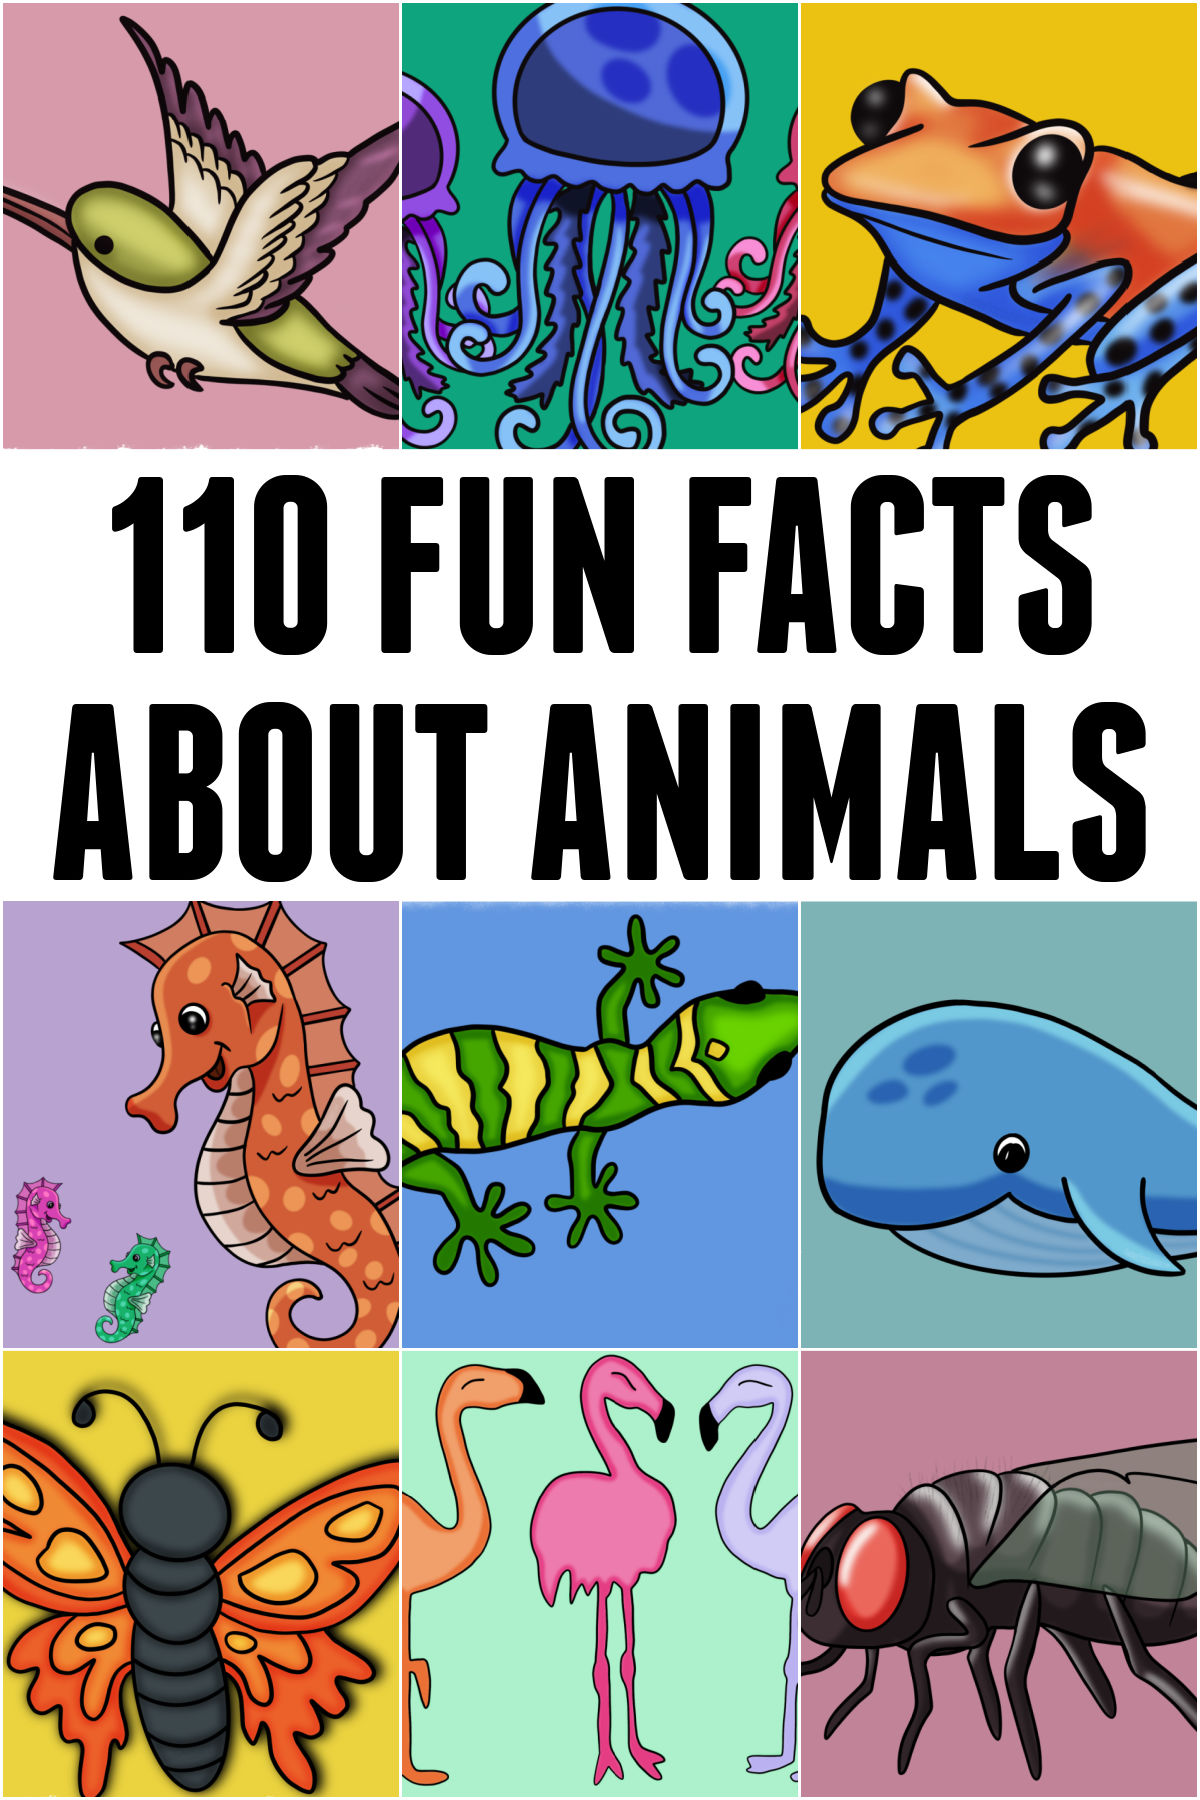 Collage of Animals with a title of 110 Fun Facts about Animals